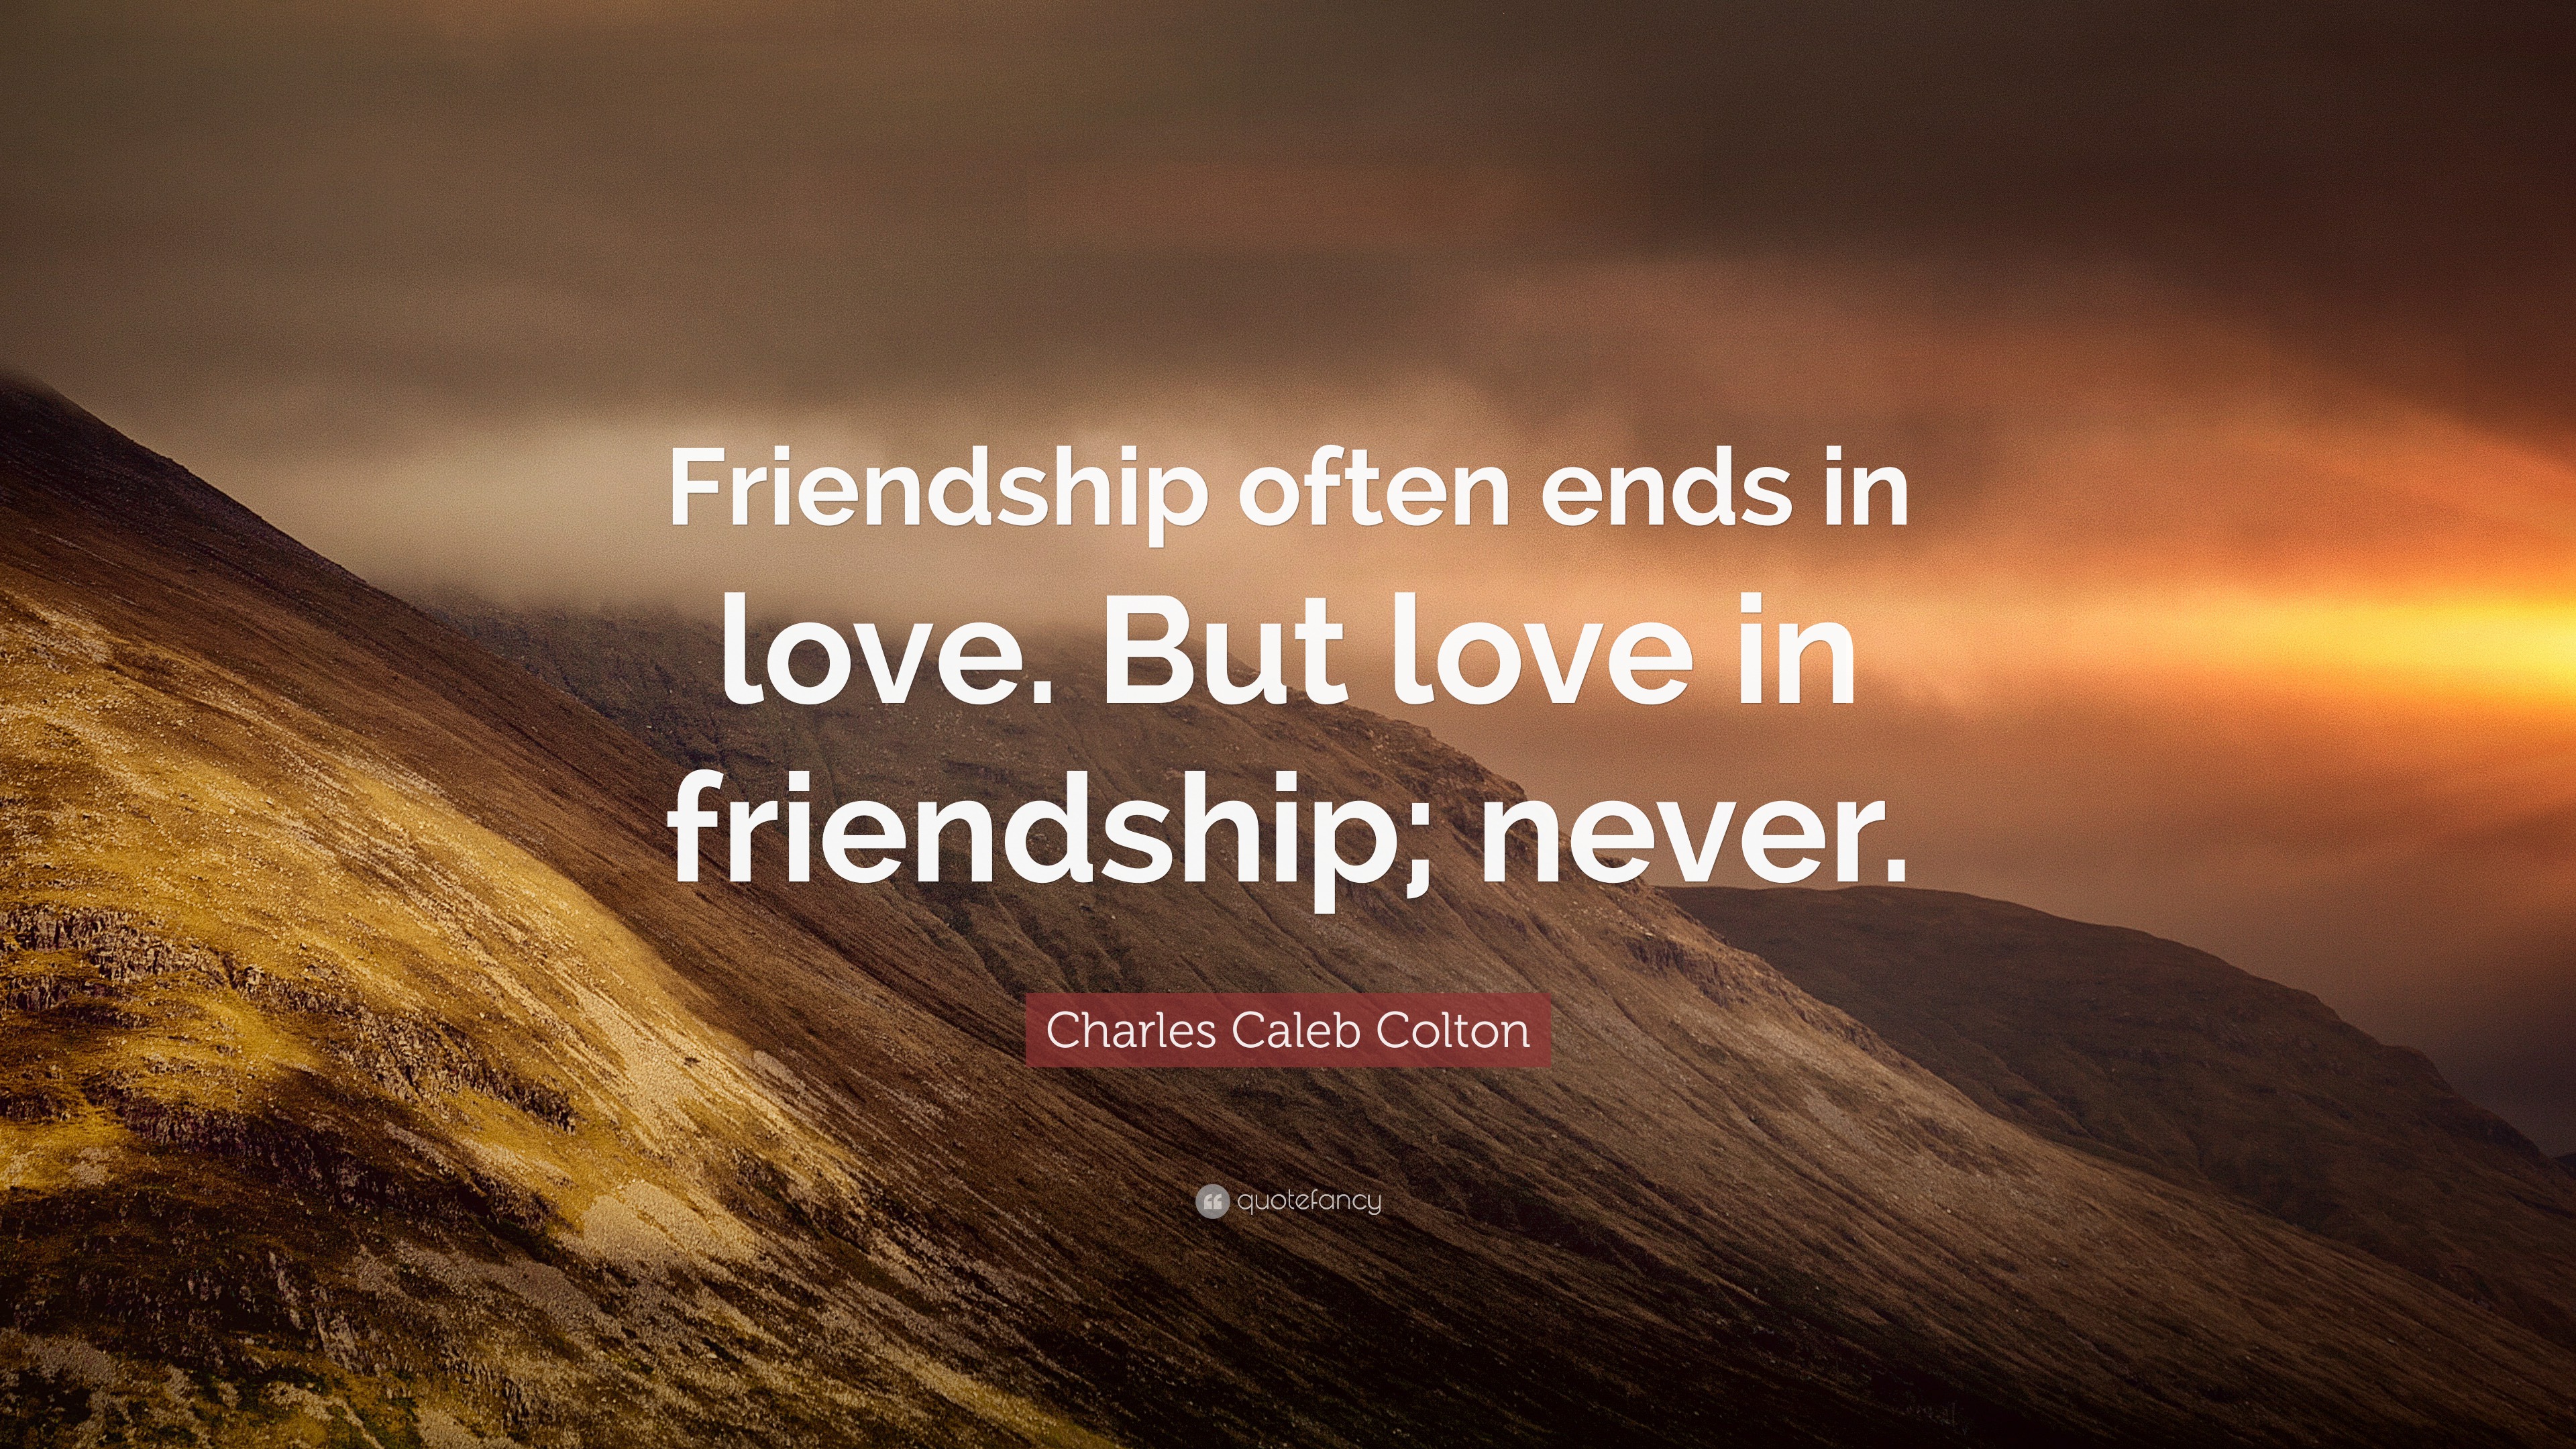 Charles Caleb Colton Quote: “Friendship often ends in love. But love in ...